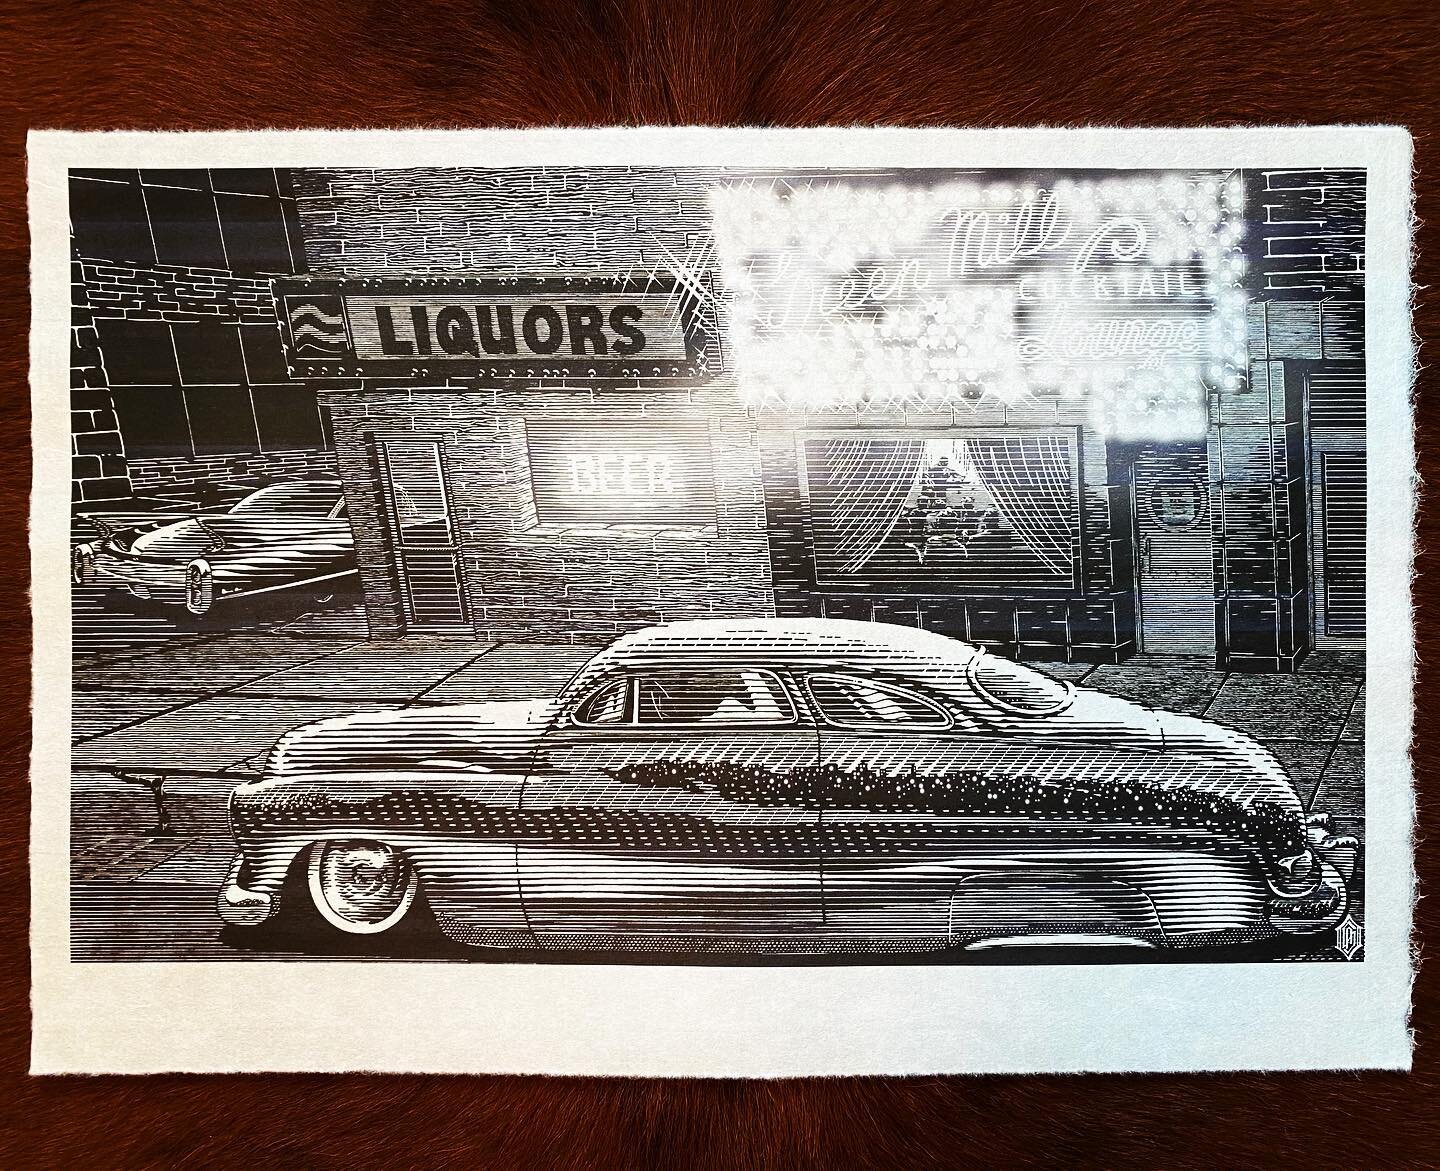 &ldquo;Jazzy Merc&rdquo; prints available in 3 different sizes. Click the link in my bio or go to oldschoolalex.com/giclee for more info. Afterpay also available. 
&bull;
&bull;
&bull;
&bull;
#merc #leadsled #praisethelowered #lowandslow #gangster #s